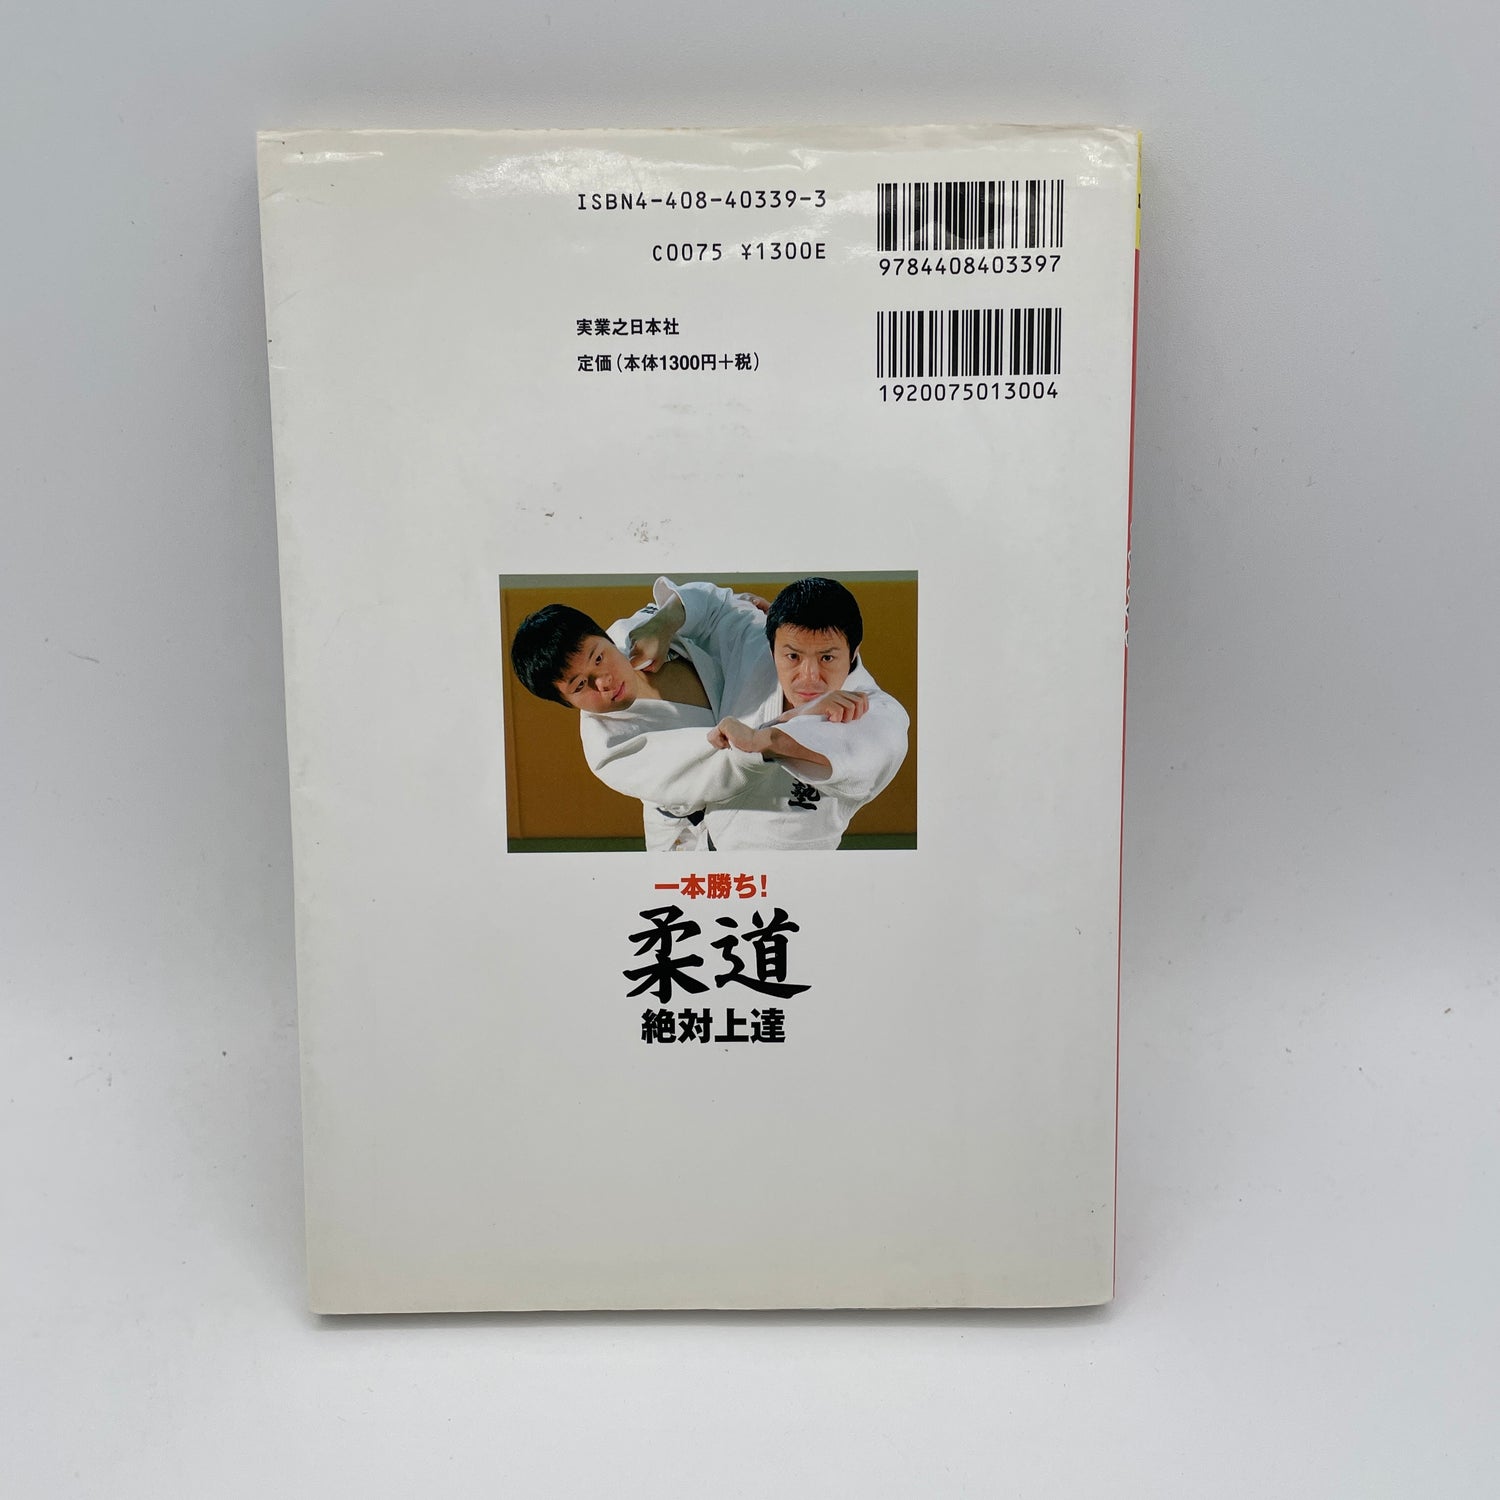 Absolute Judo Improvement Book By Toshihiko Koga (Preowned)